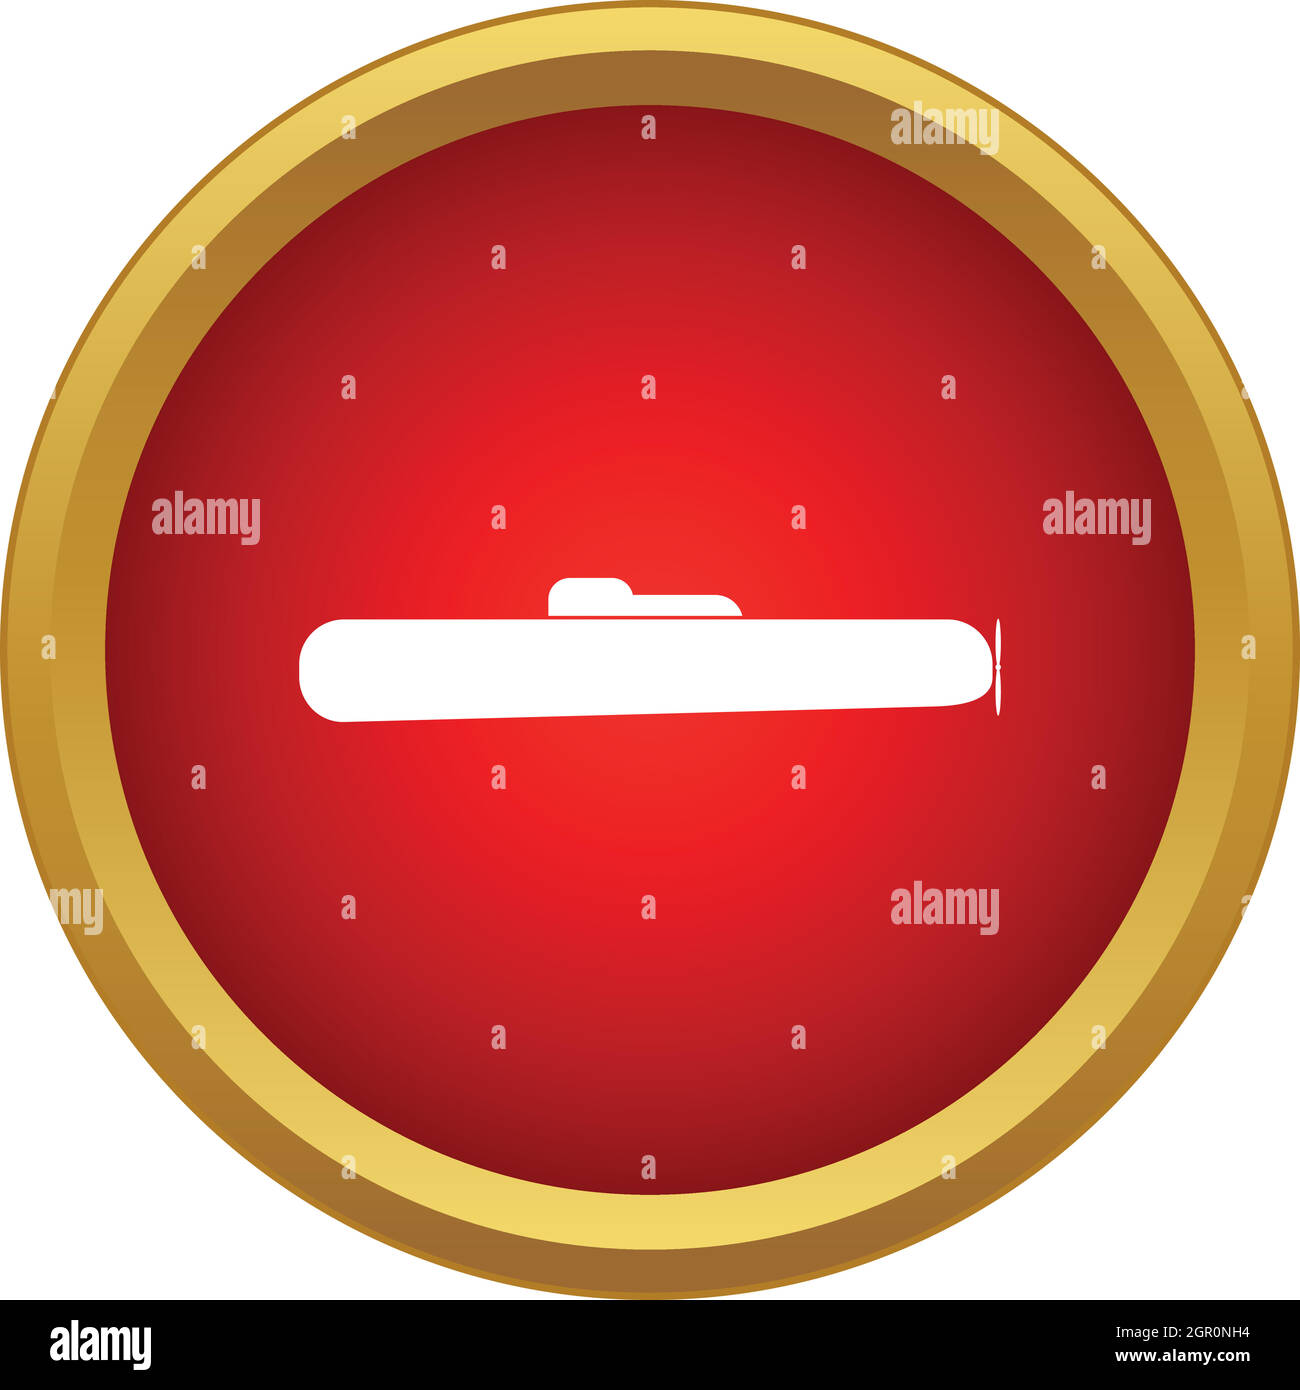 Submarine icon in simple style Stock Vector